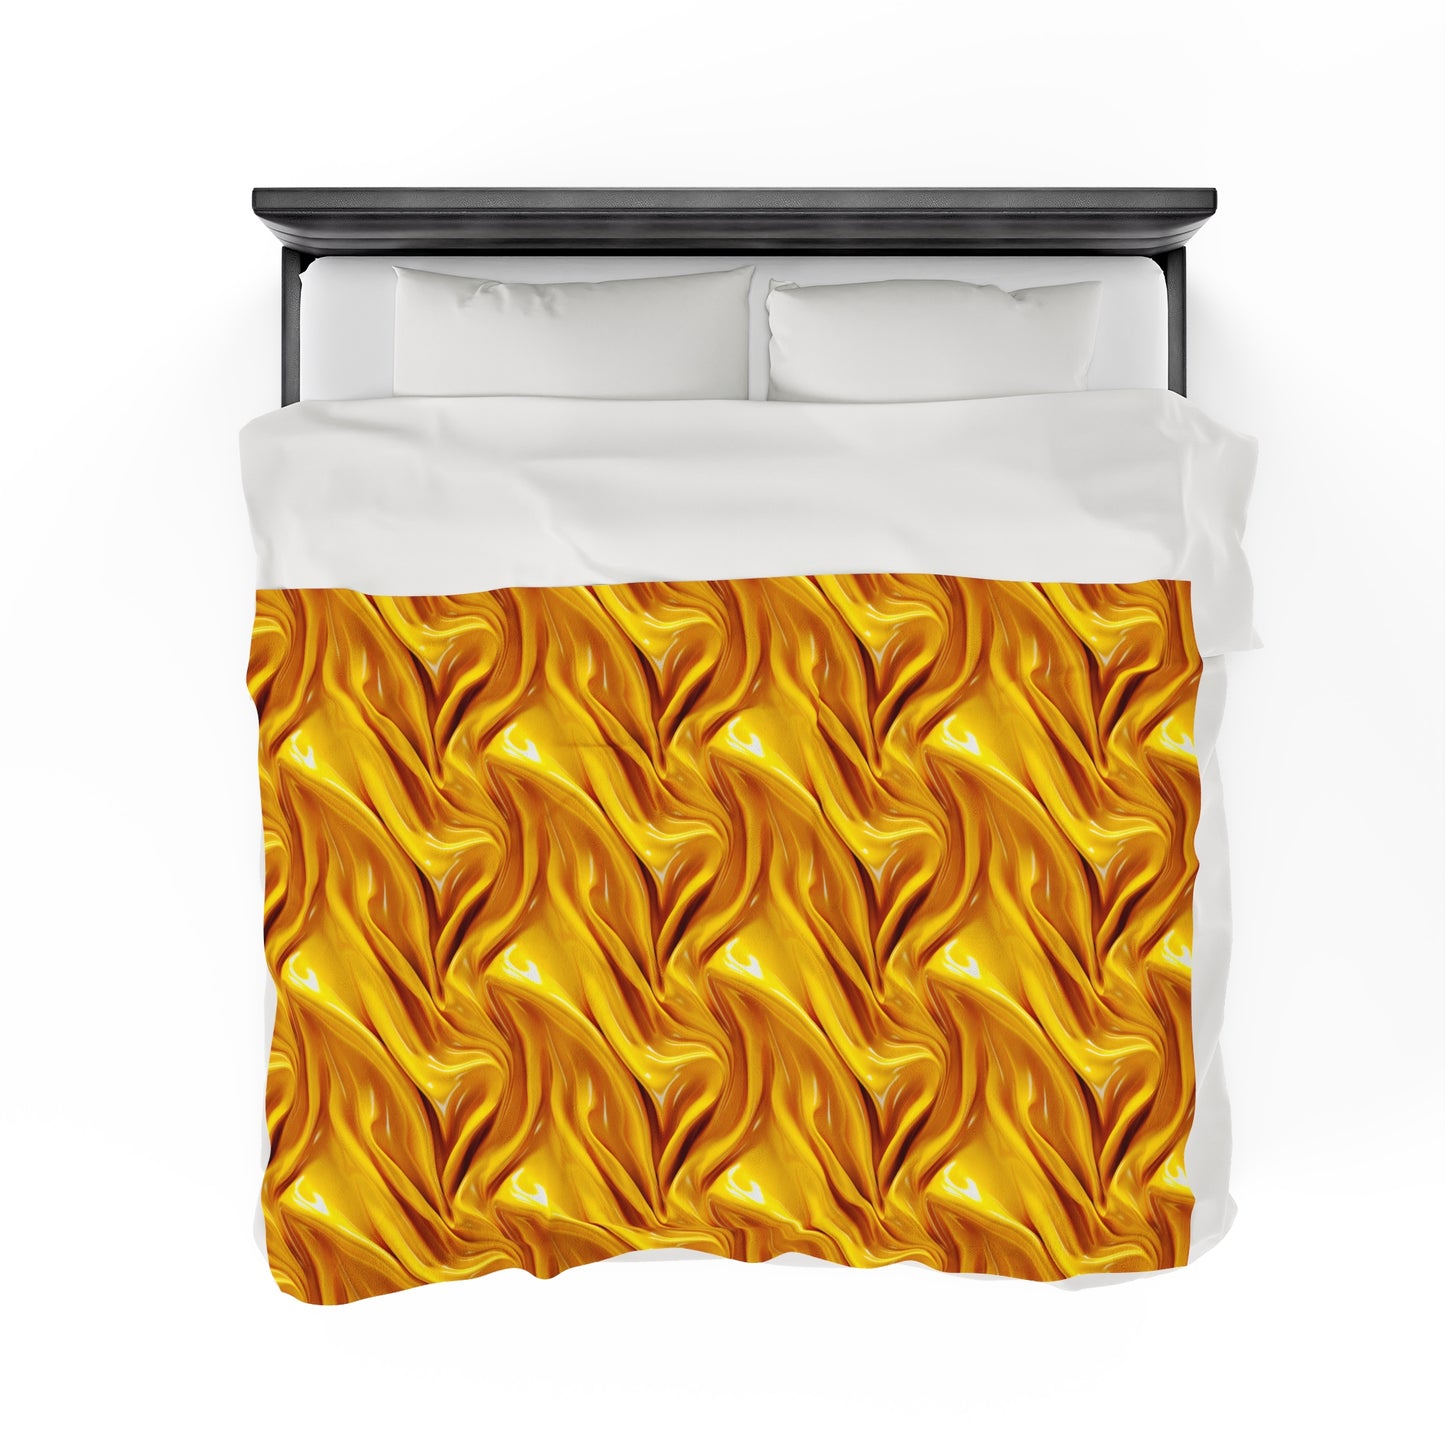 Velveteen Plush Blanket | Gold Illusion Throw Blanket from The Curated Goose